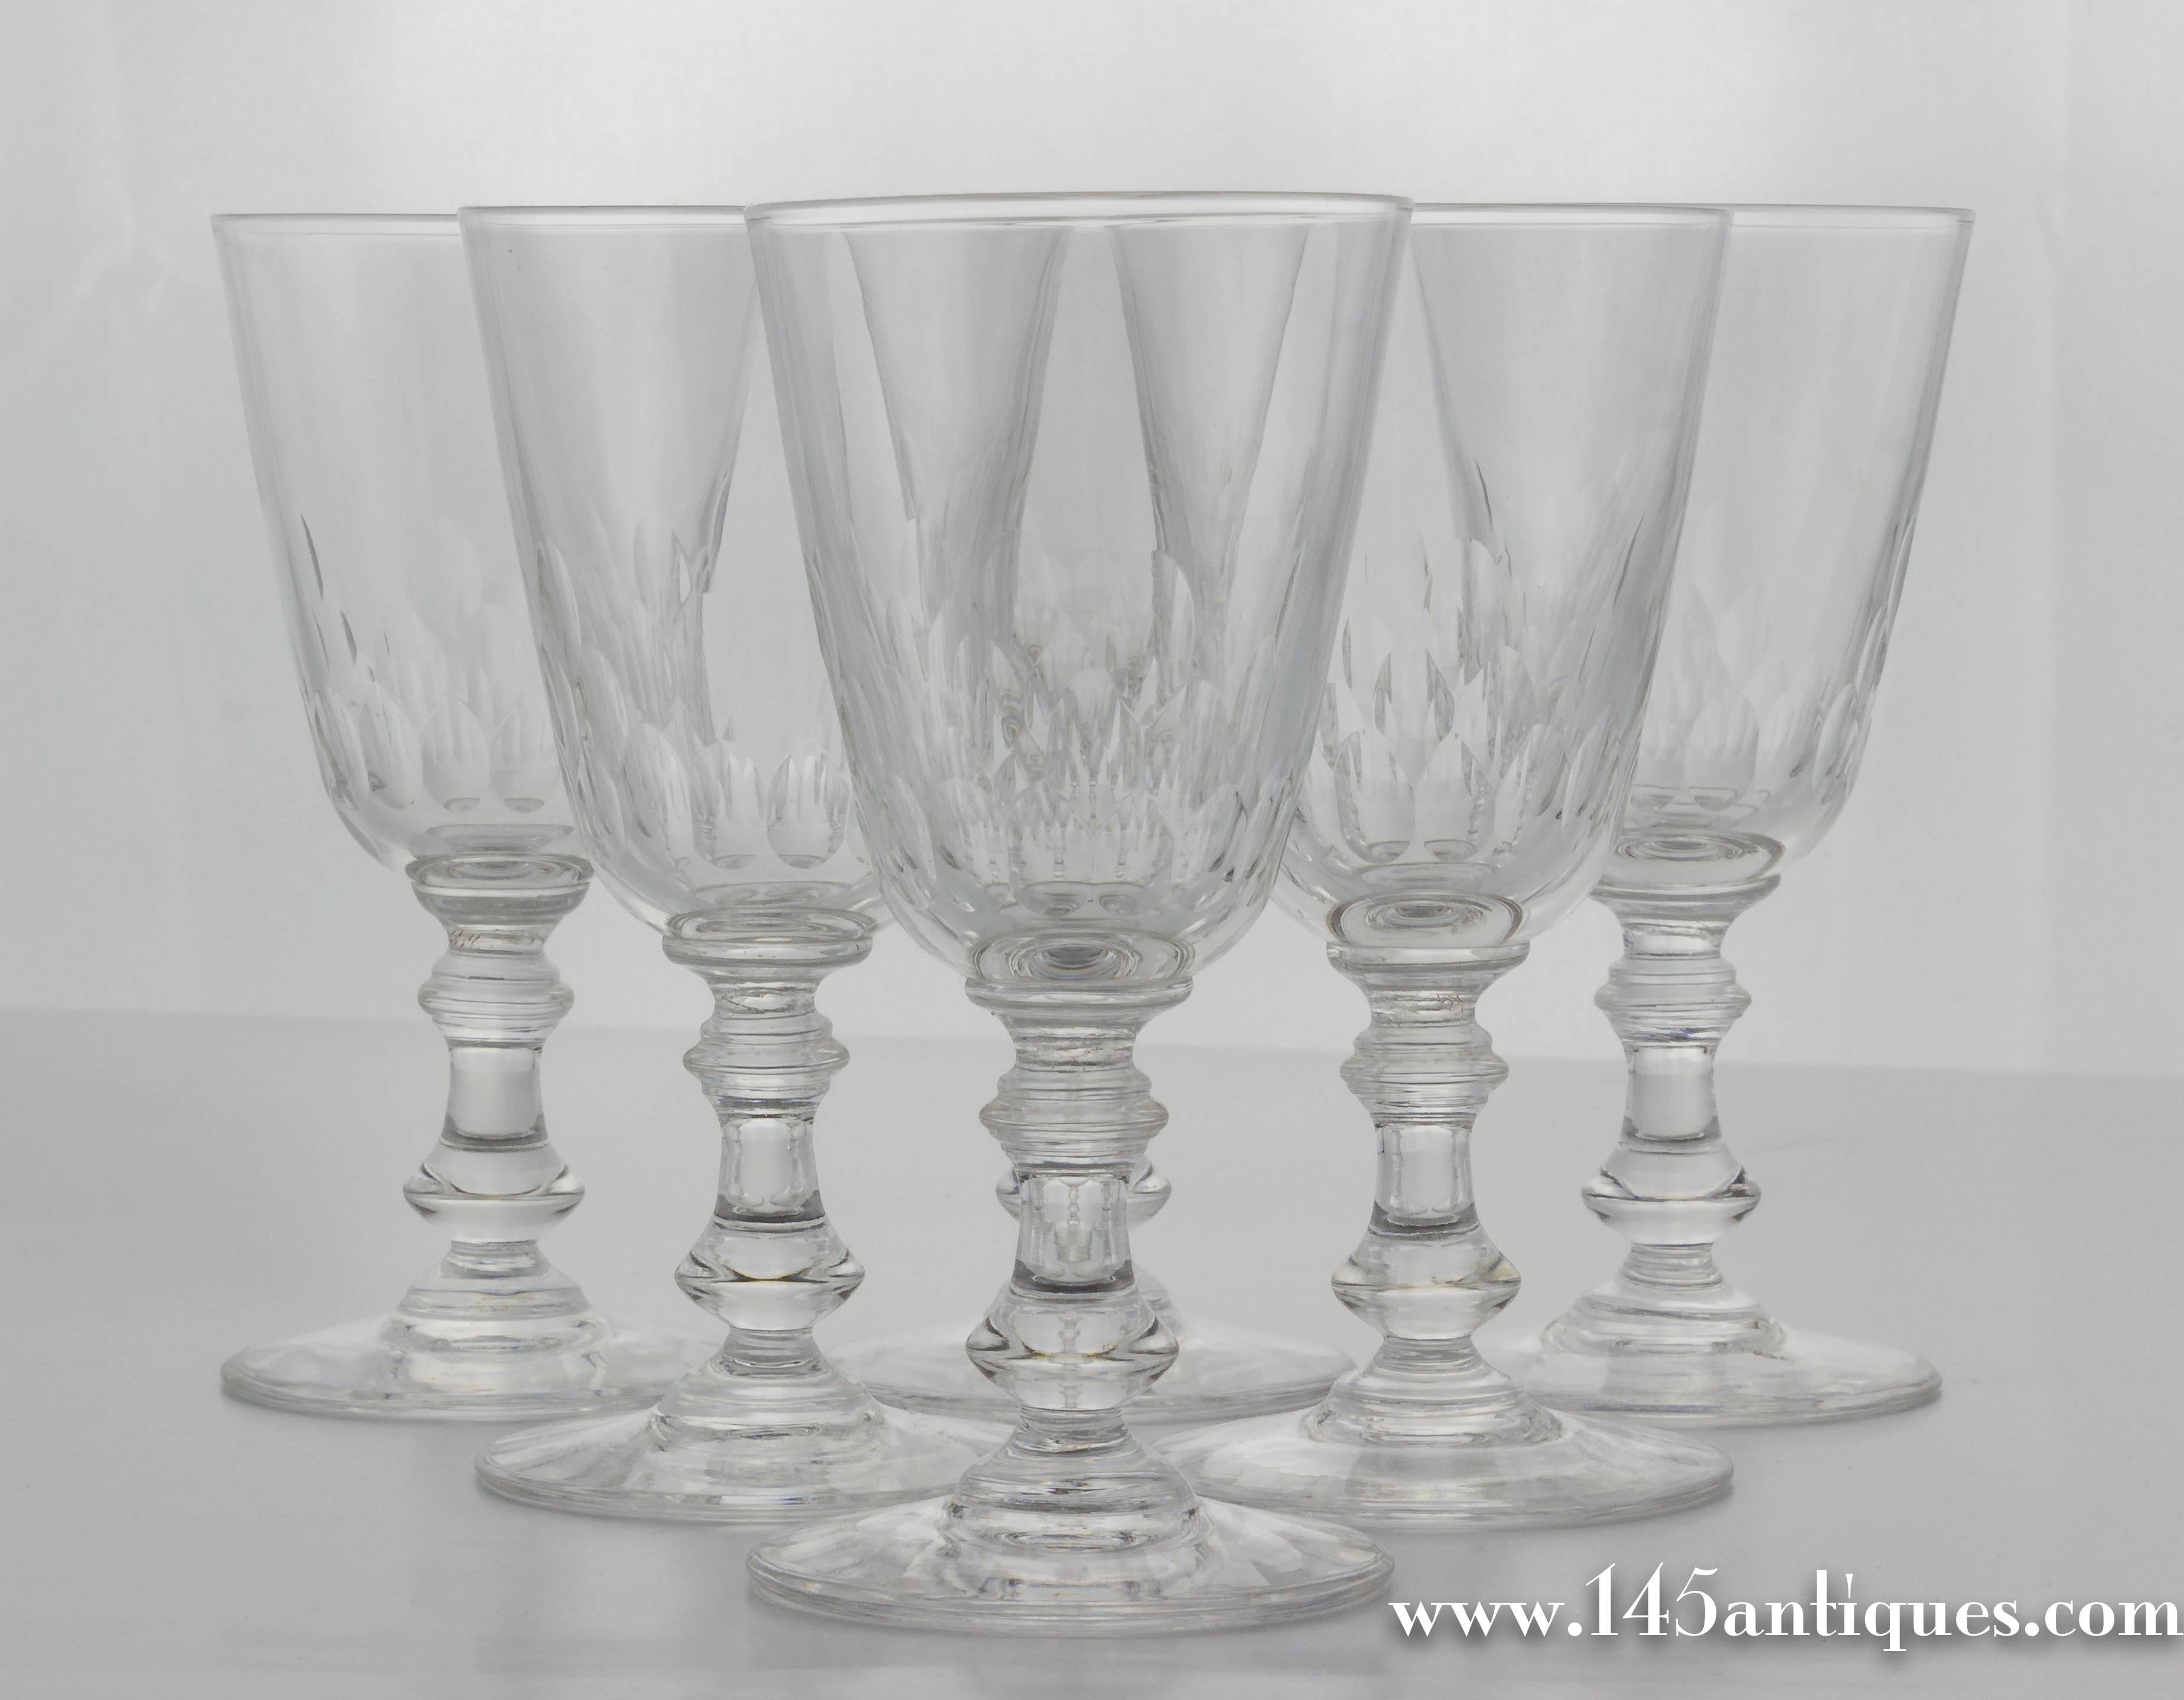 24-piece set of French 1930s crystal glassware.

This set is complete with following glasses:

Six- red wine (6